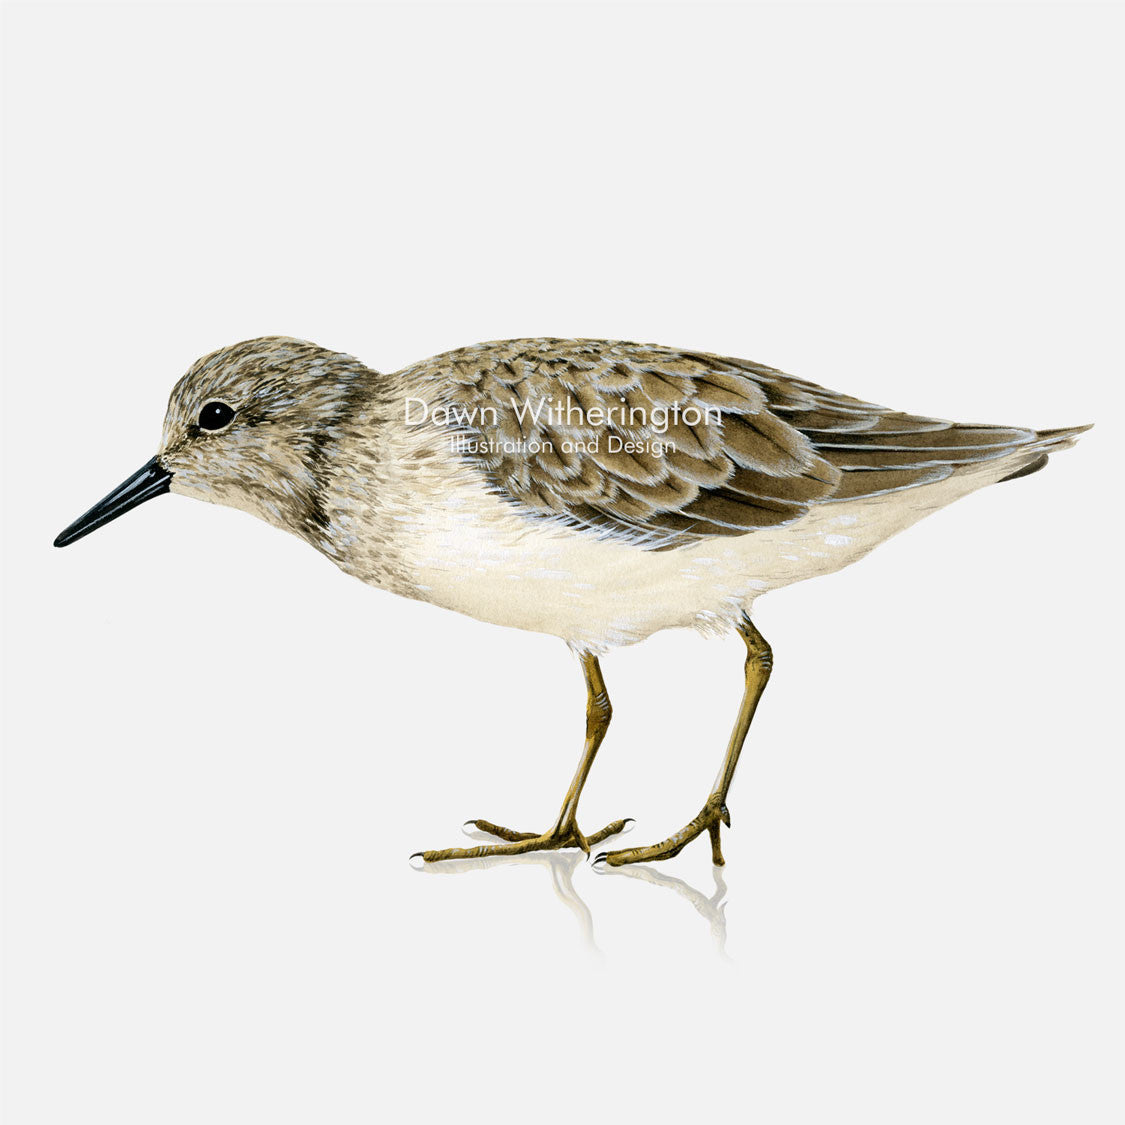 This beautiful illustration of a least sandpiper, Calidris minutilla, is biologically accurate in detail.